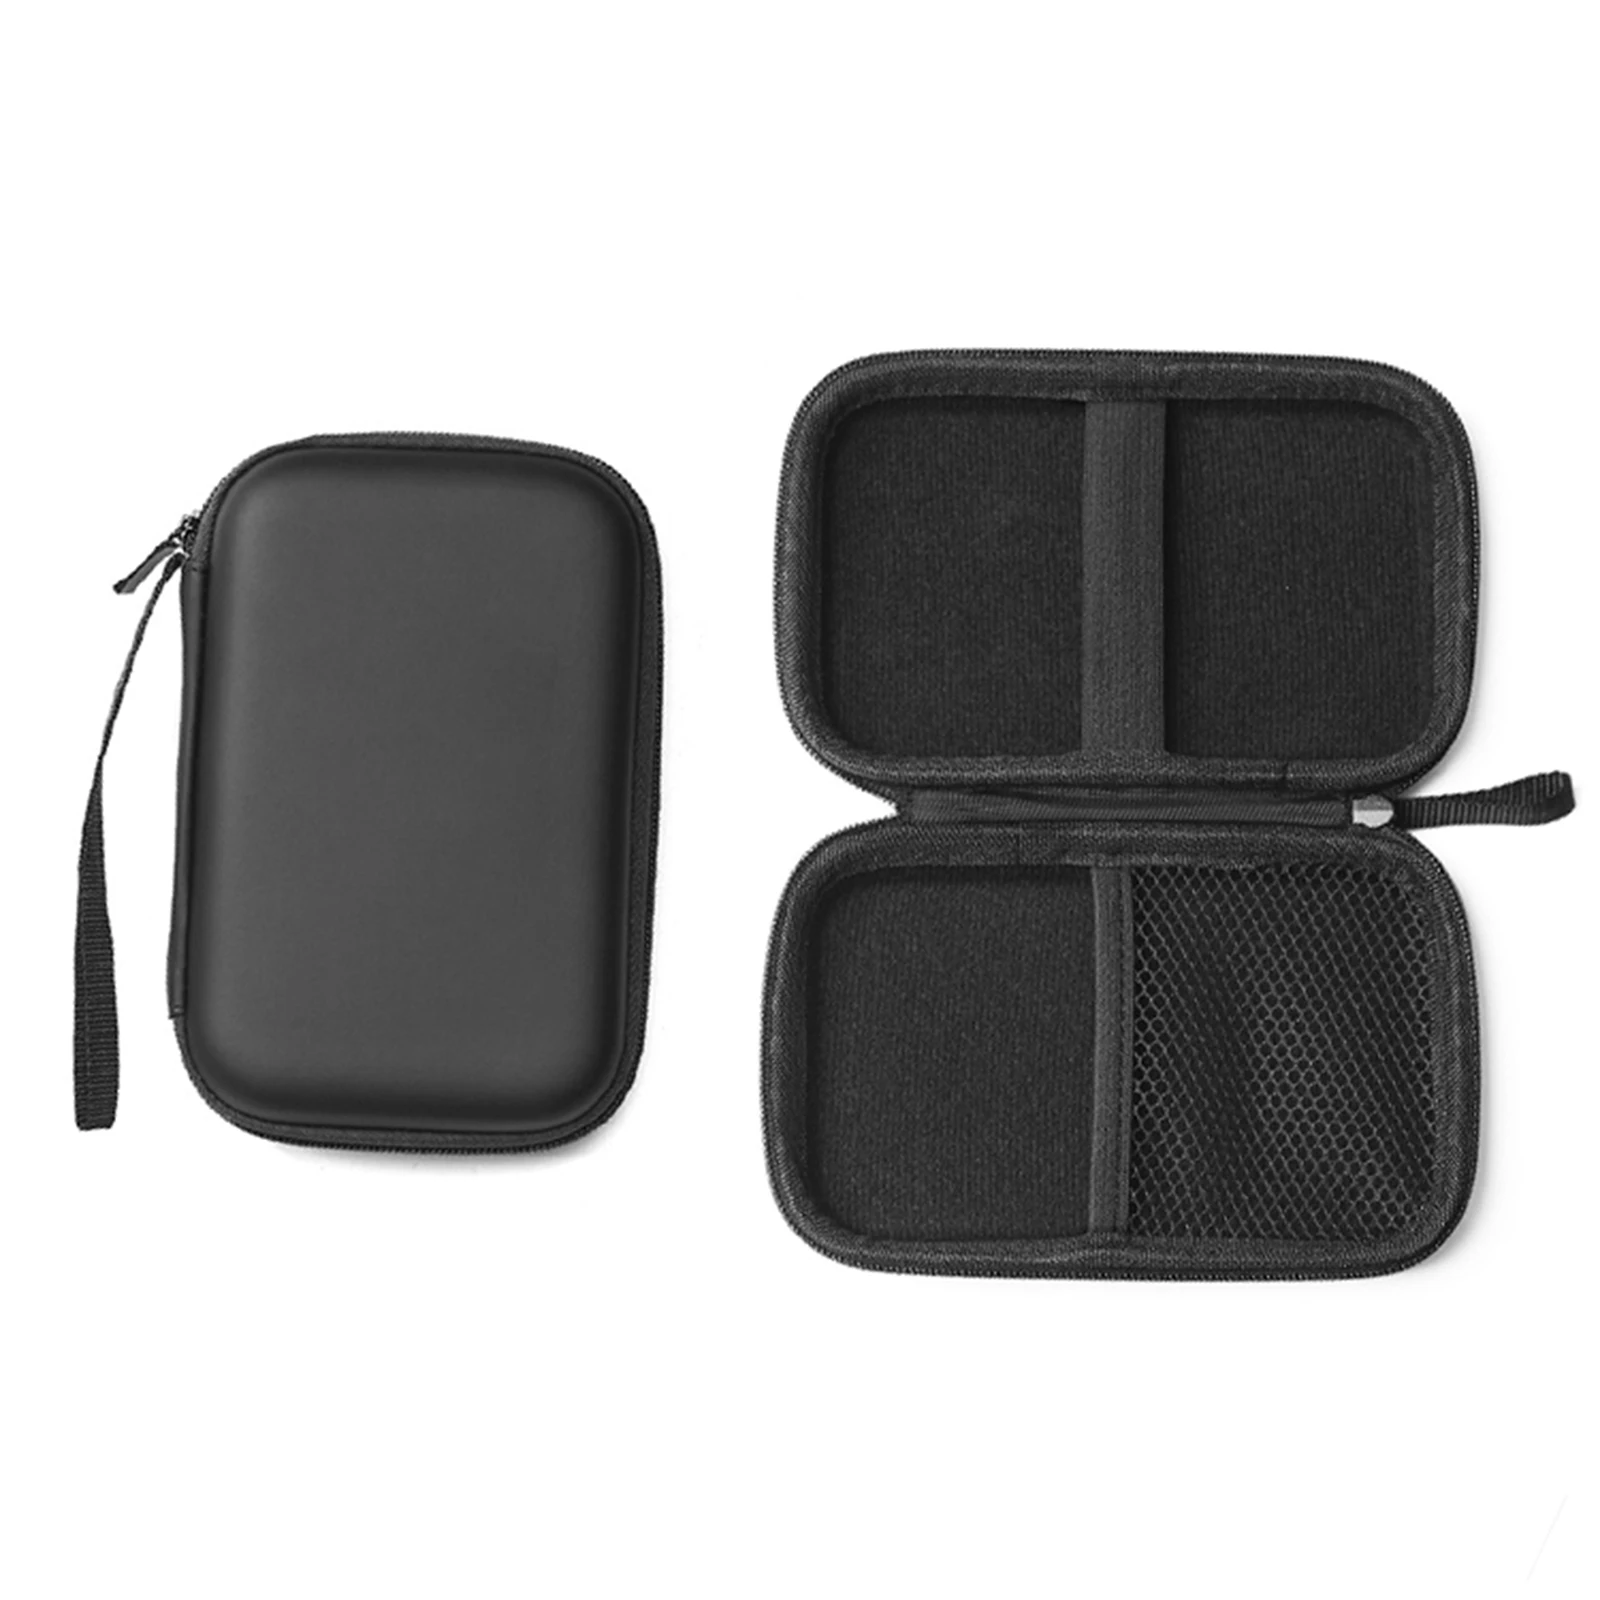 Carrying Case Storage Bag Cover Box for FiiO M3K M6 M9 M11 MK2 MP3 Player Accessories